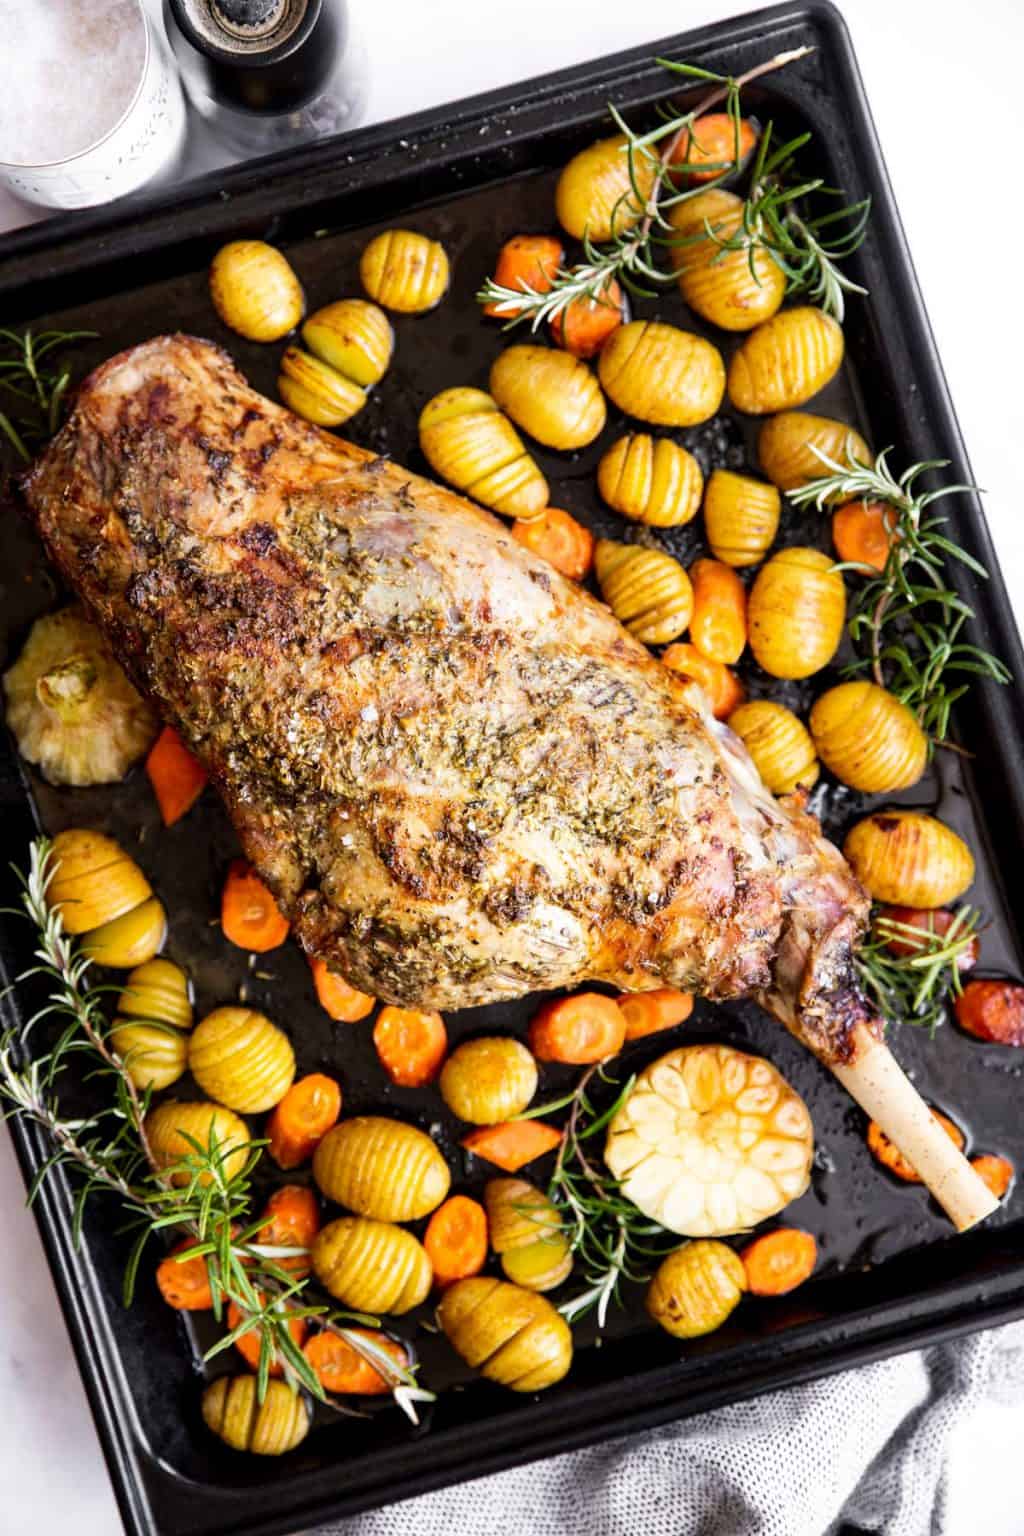 Oven Roasted Leg Of Lamb Recipe Video Savory Nothings